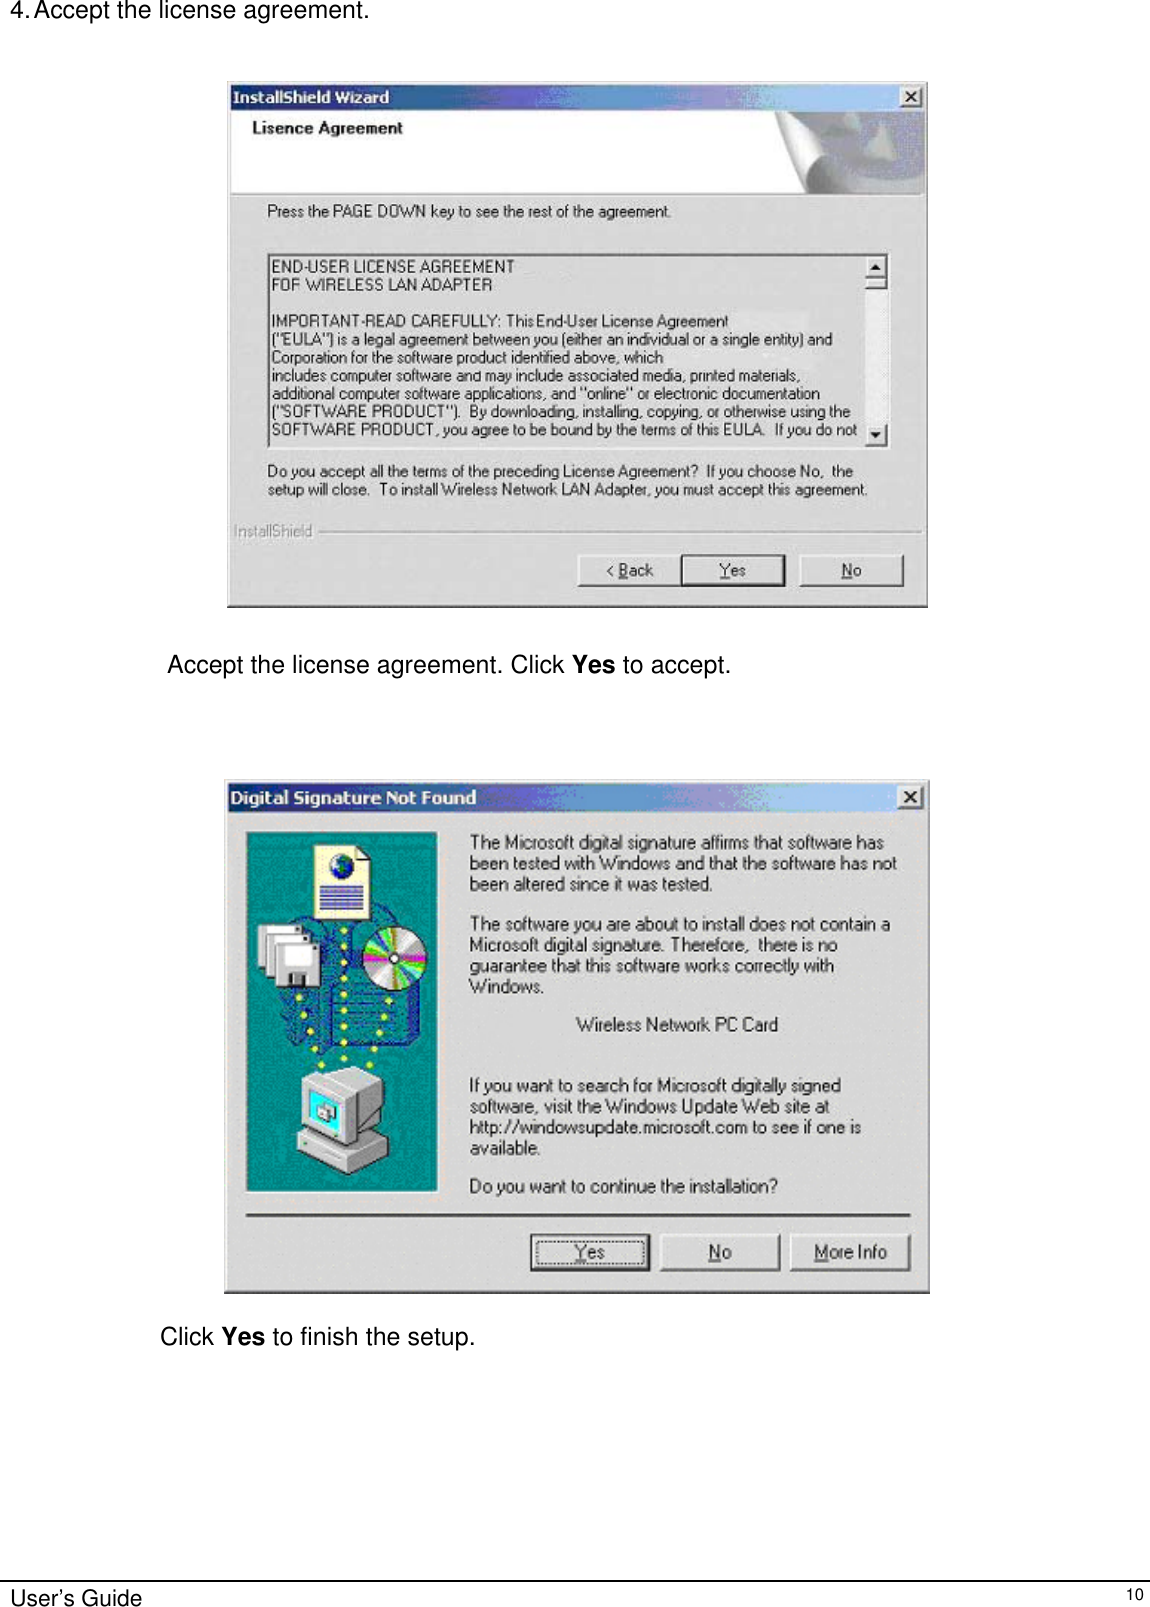                                                                                                                                                                              4. Accept the license agreement.     Accept the license agreement. Click Yes to accept.                          Click Yes to finish the setup.  User’s Guide   10